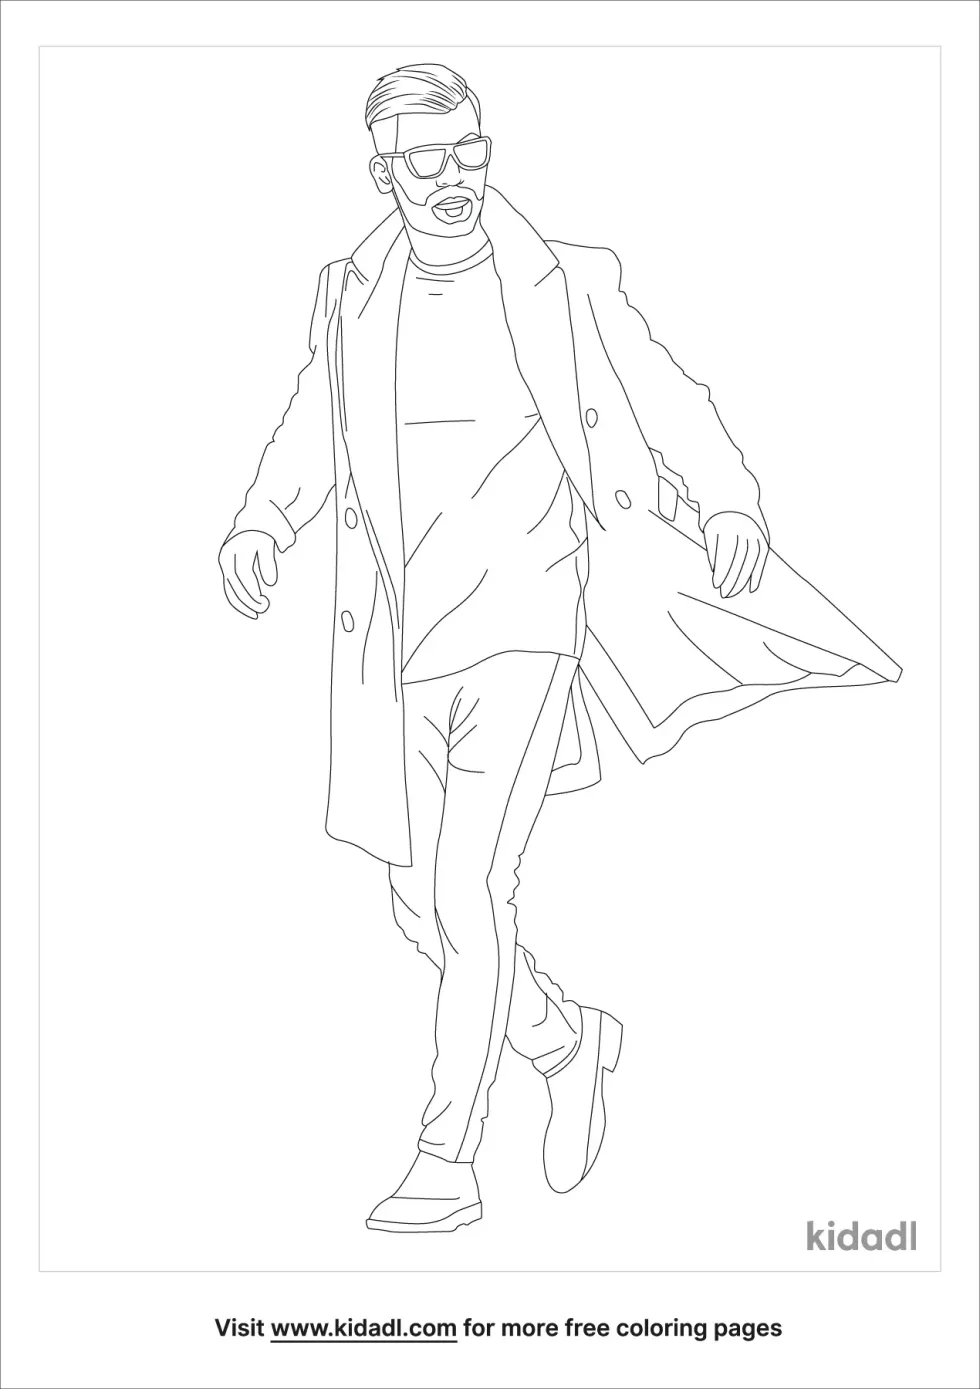 Handsome Man Coloring Page